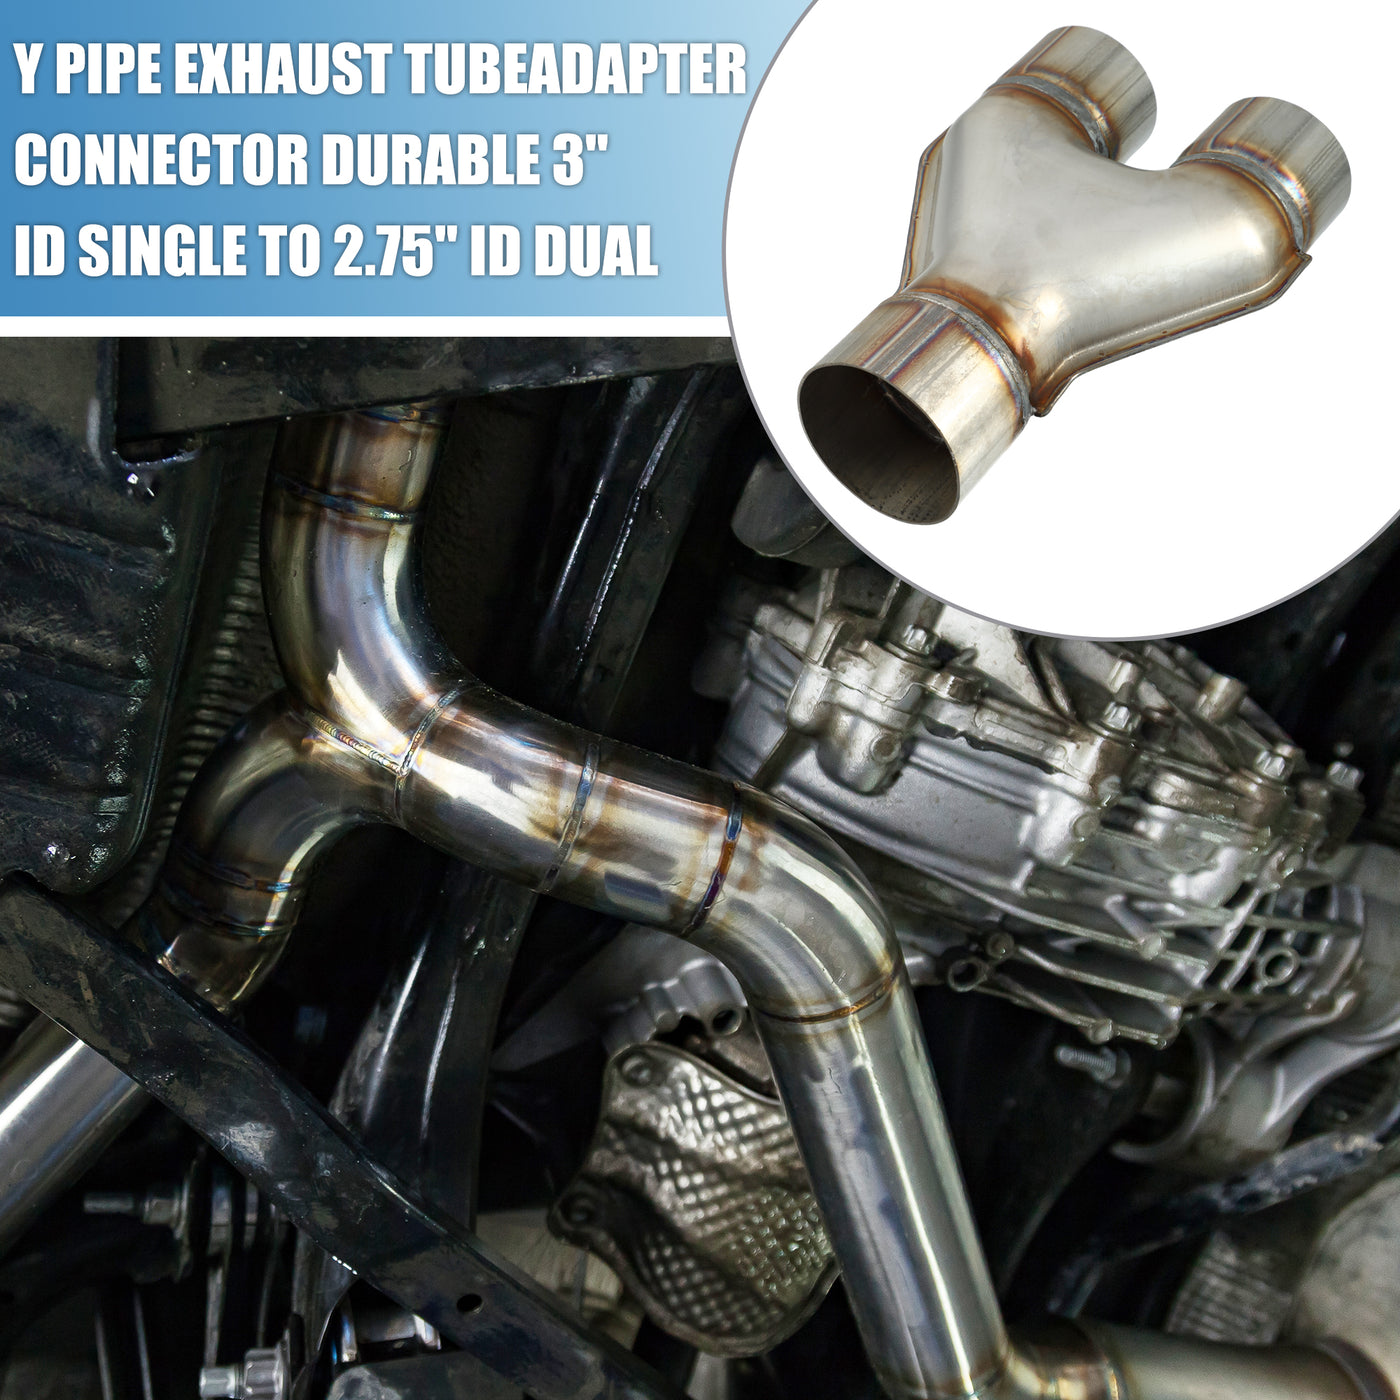 A ABSOPRO Y Pipe Exhaust Tube Adapter Connector Durable 3" ID Single to 2.75" ID Dual Exhaust Adapter Connector 10 Inch Overall Length T409 Stainless Steel Silver Tone